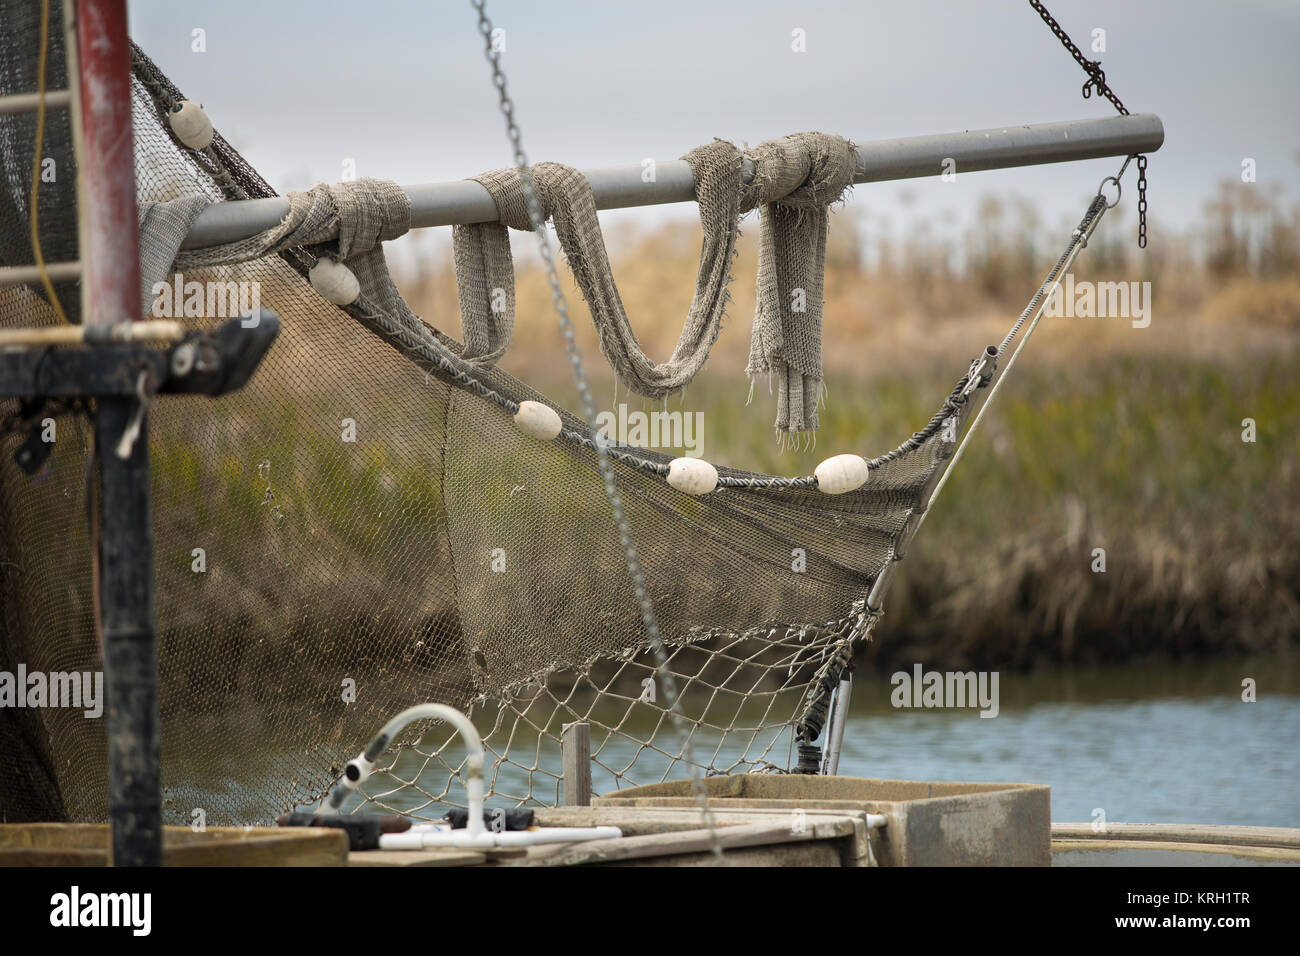 Fishing net hanging on an old commercial fishing boat Stock Photo